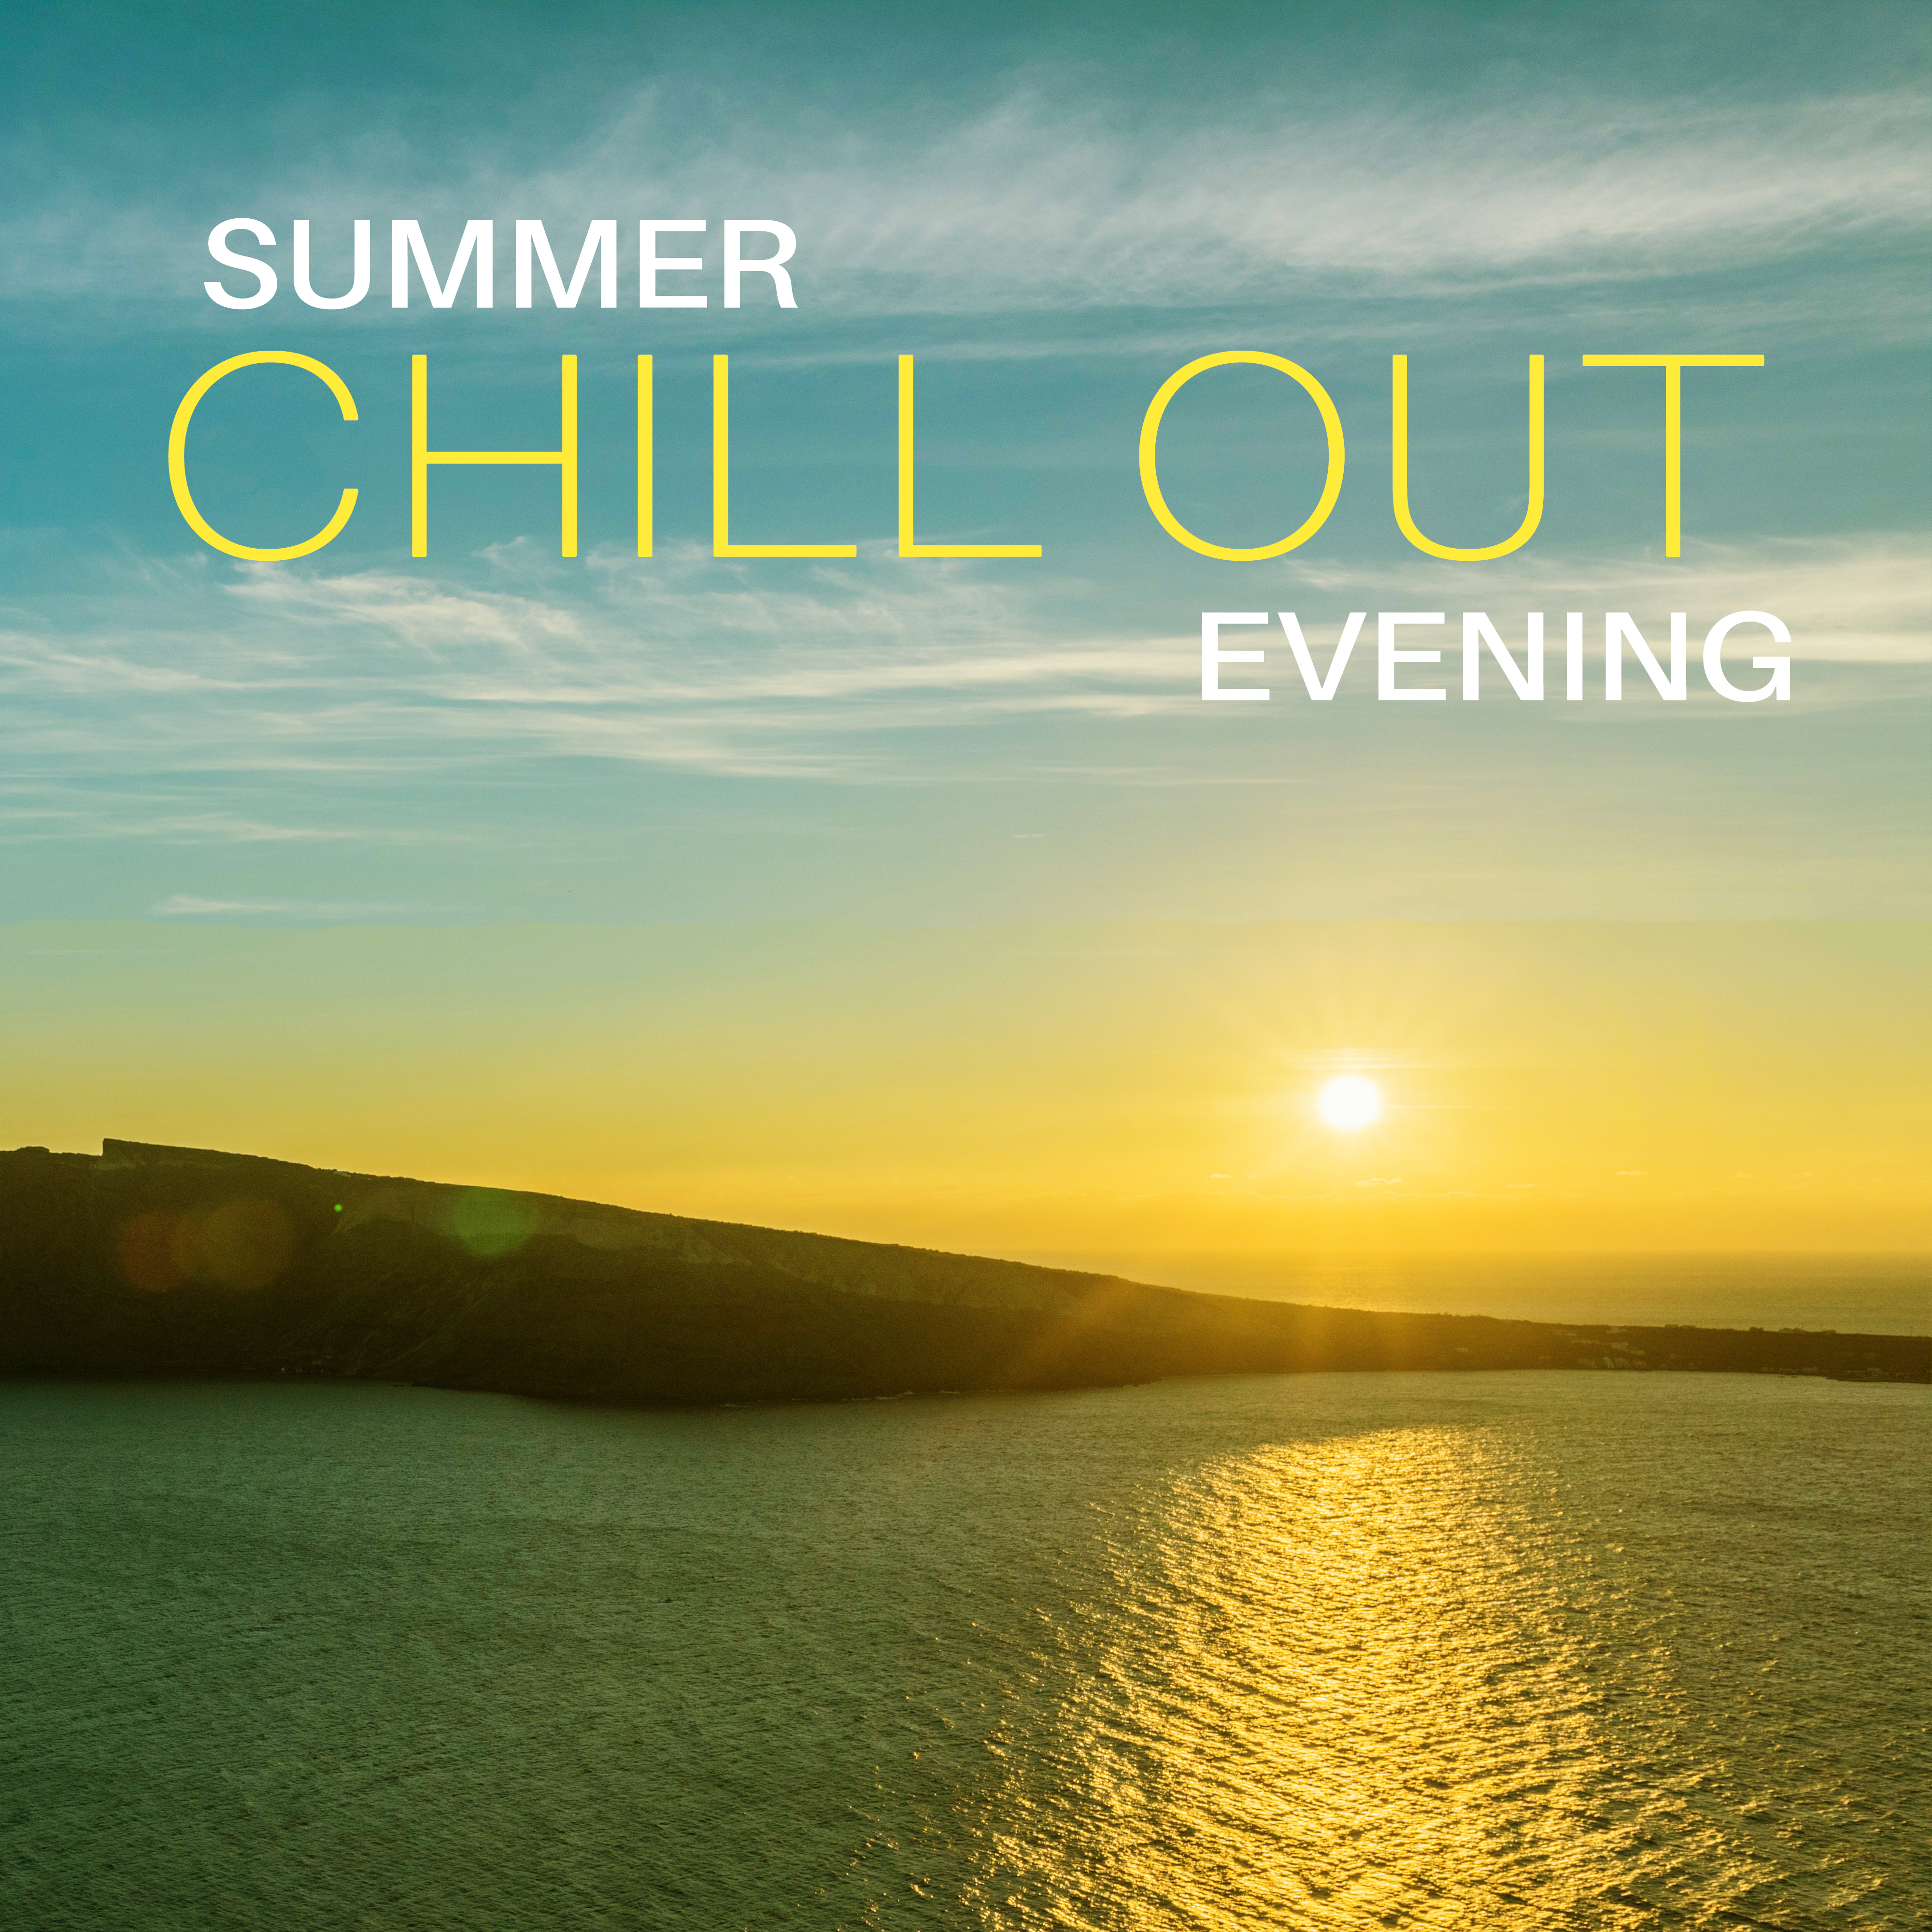 Summer Chill Out Evening – Time to Rest & Relax, Easy Listening, Sensual Vibes, Holiday Melodies